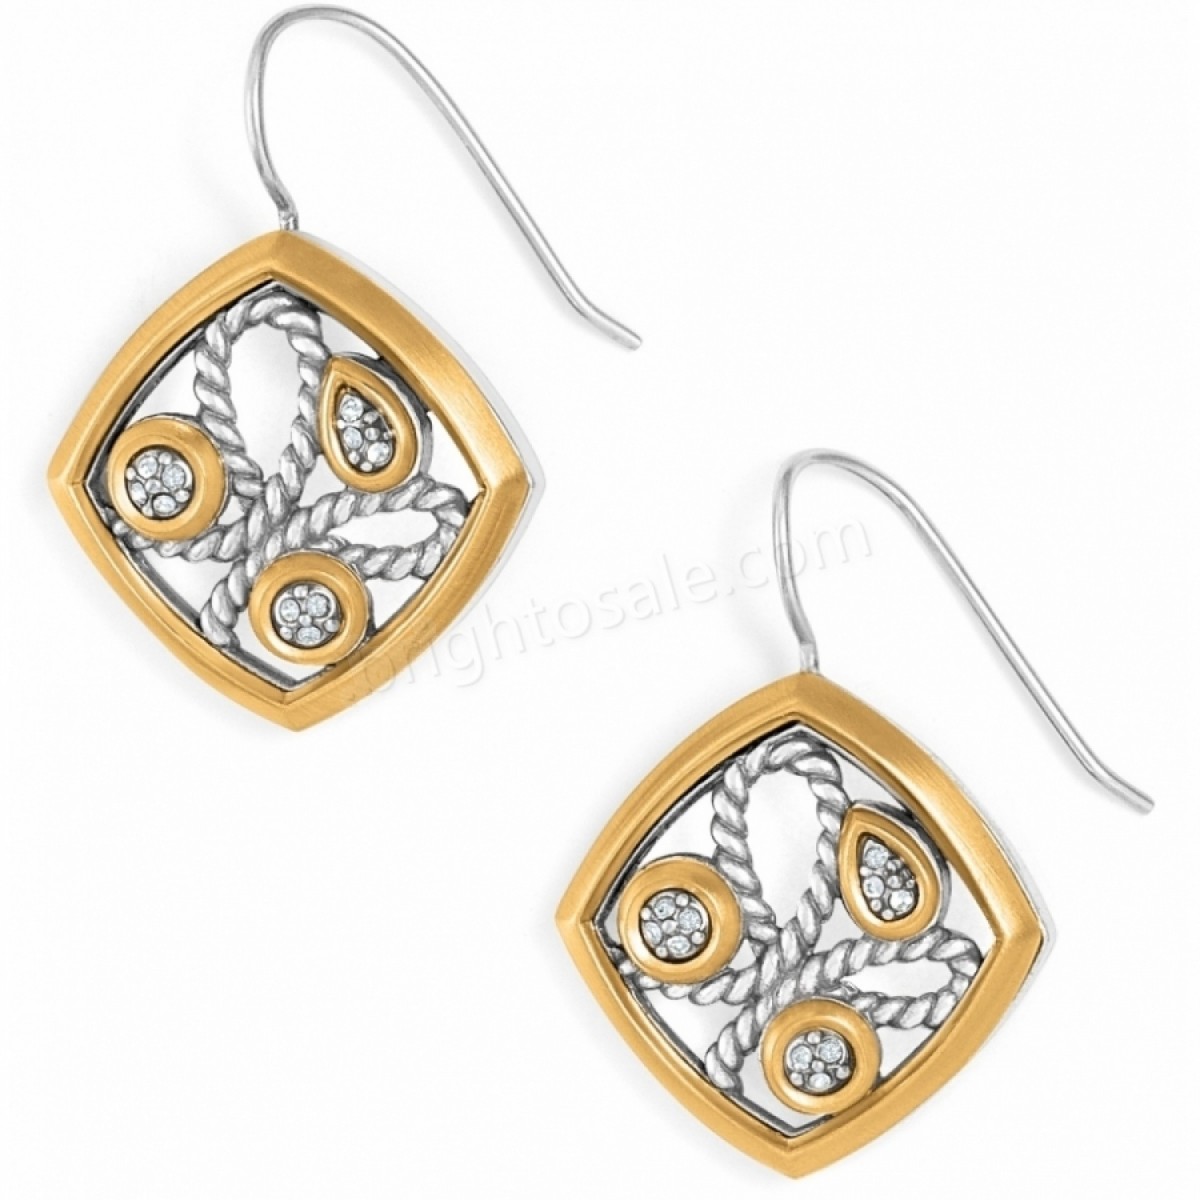 Brighton Collectibles & Online Discount Toledo Collective Charm Post Drop Earrings - -0